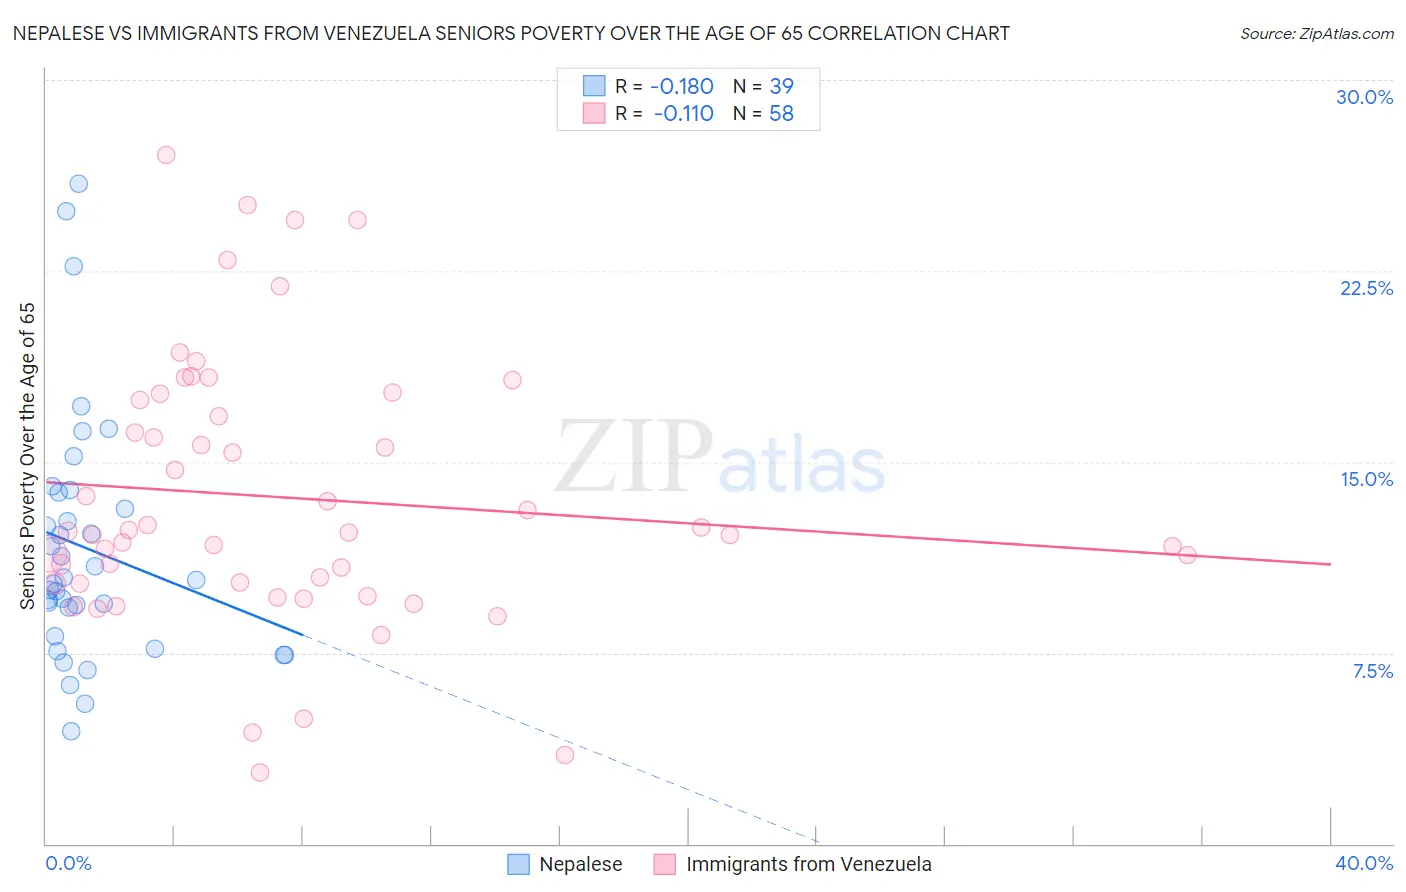 Nepalese vs Immigrants from Venezuela Seniors Poverty Over the Age of 65